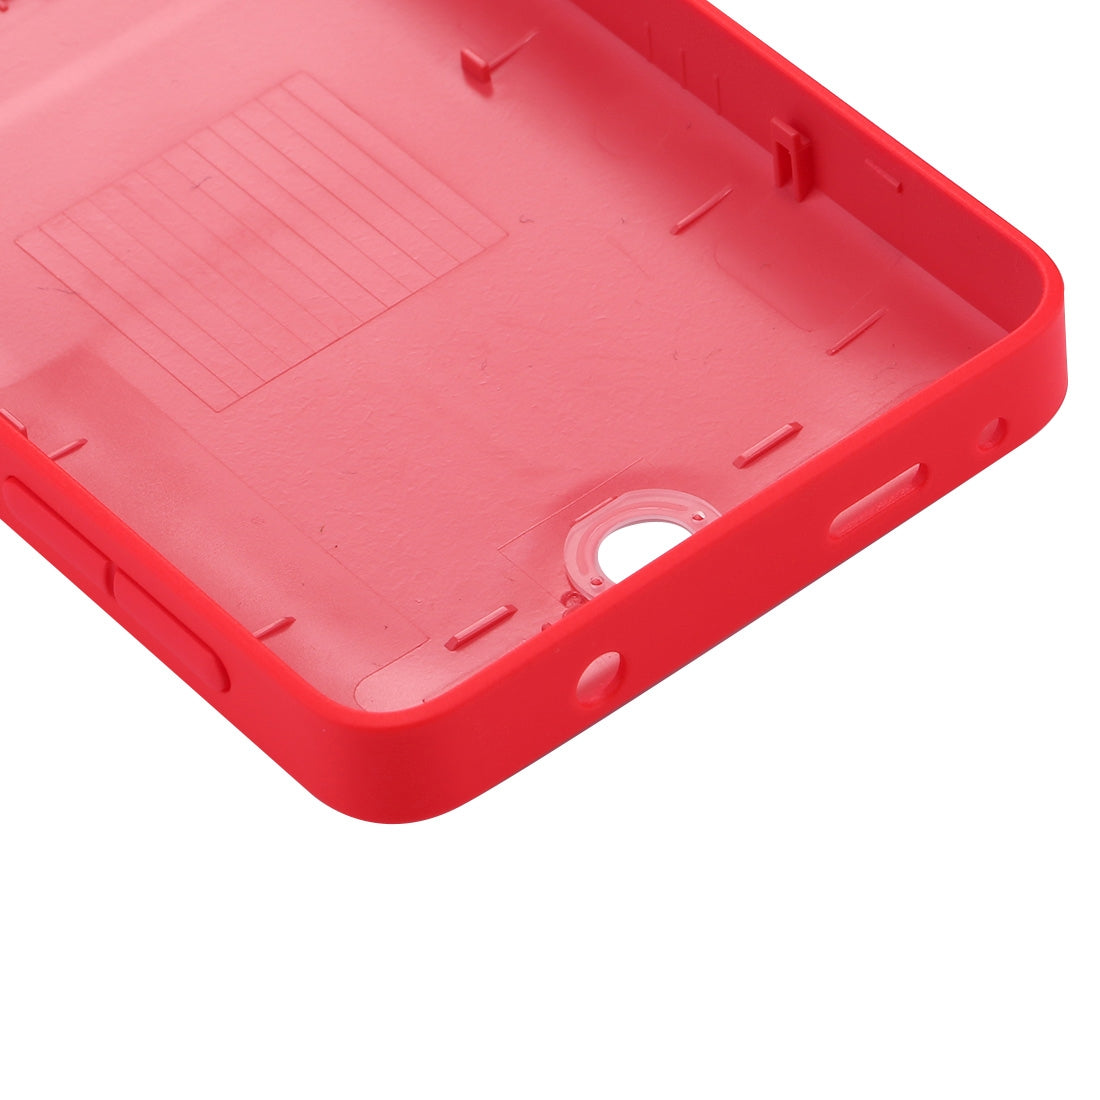 Battery Cover Back Cover Nokia Asha 501 Red